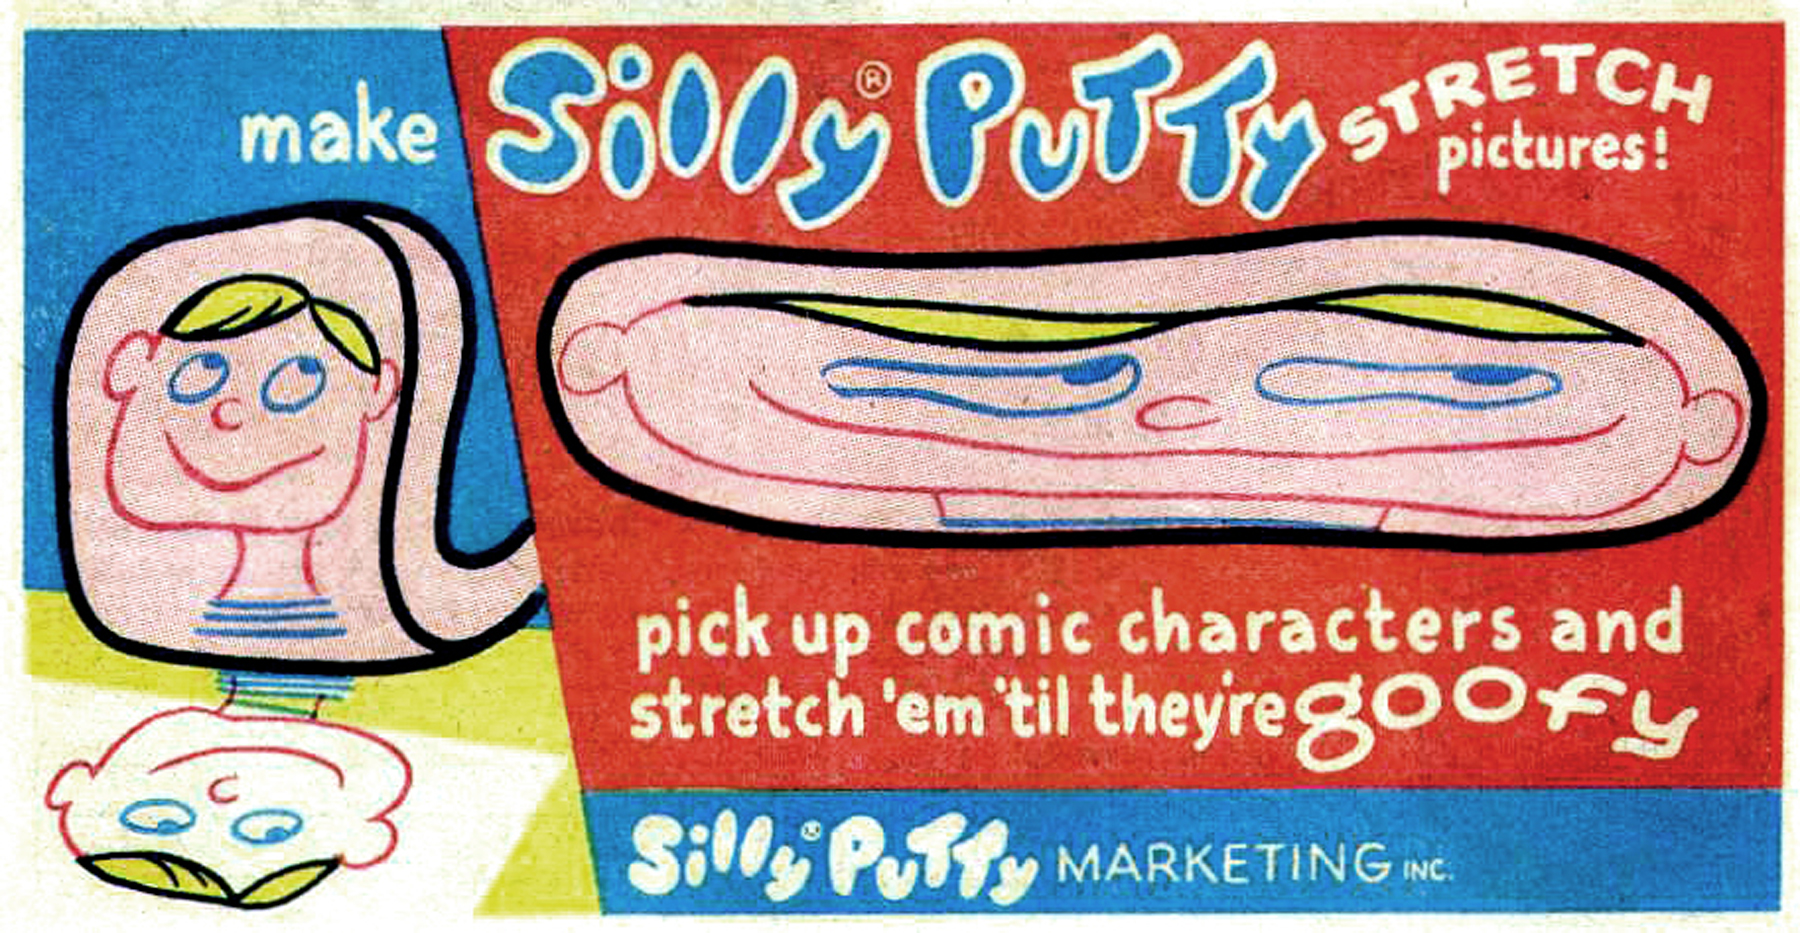 Vintage Marketing for Silly Putty